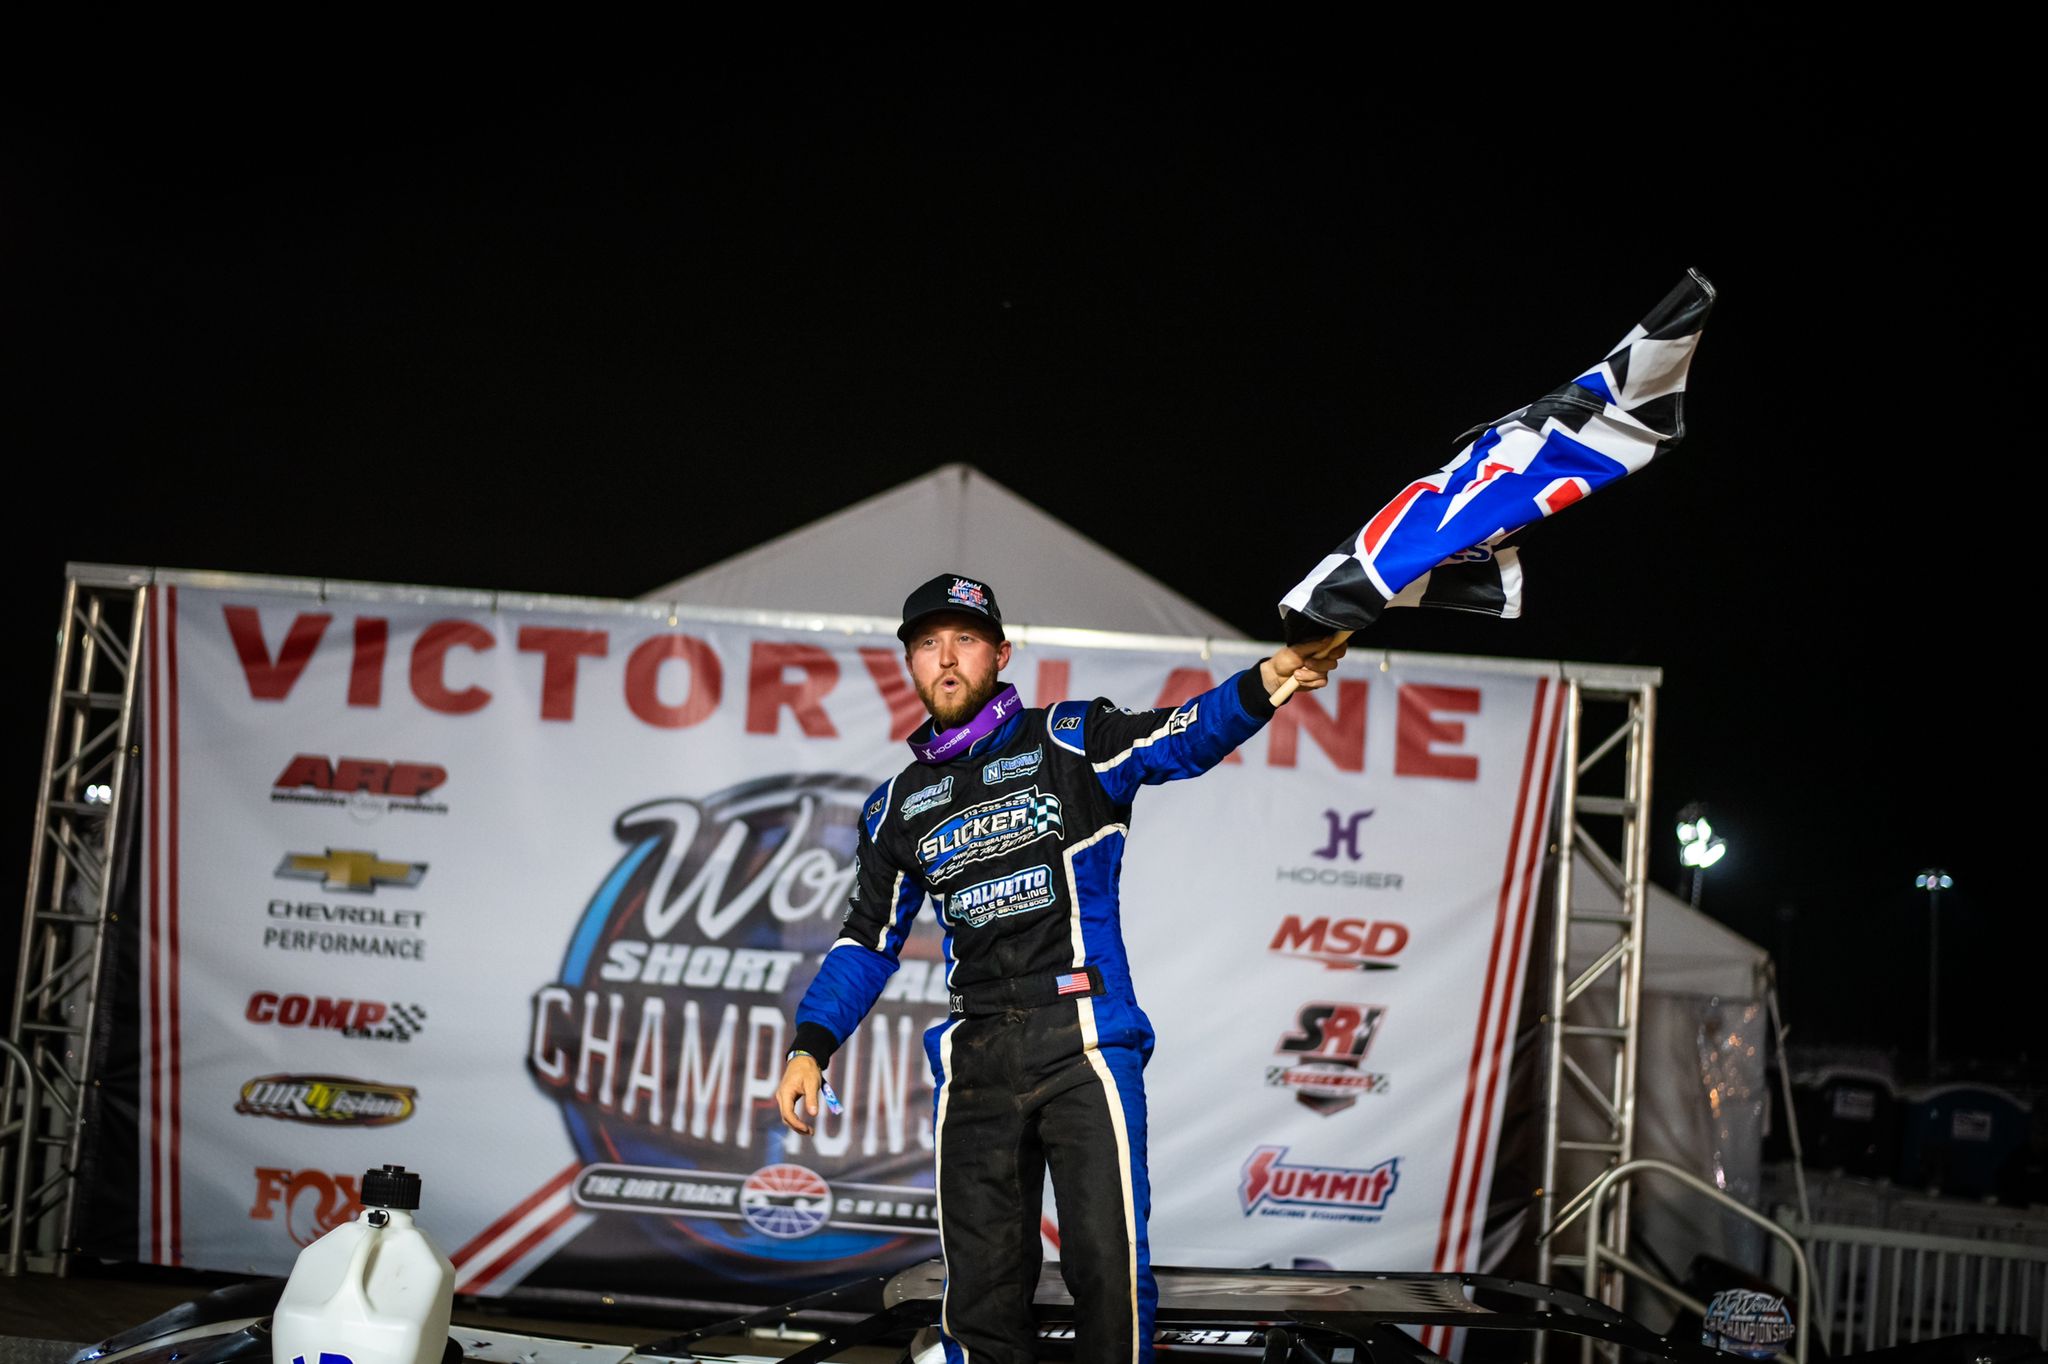 Trent Ivey wins at The Dirt Track Charlotte